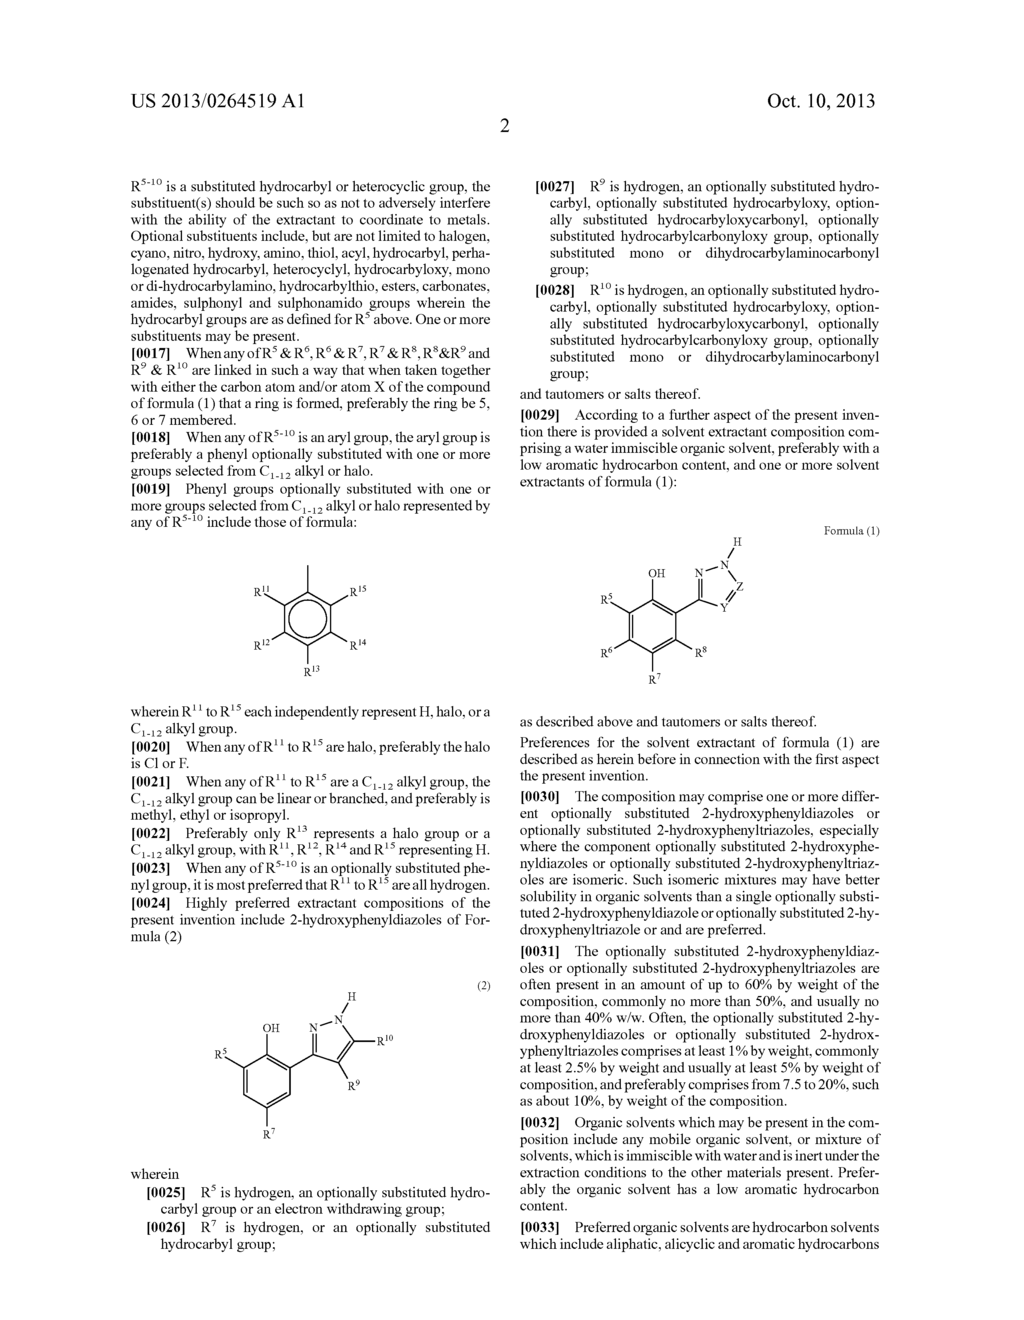 Phenoxypyrazole Composition and Process for the Solvent Extraction of     Metals - diagram, schematic, and image 03